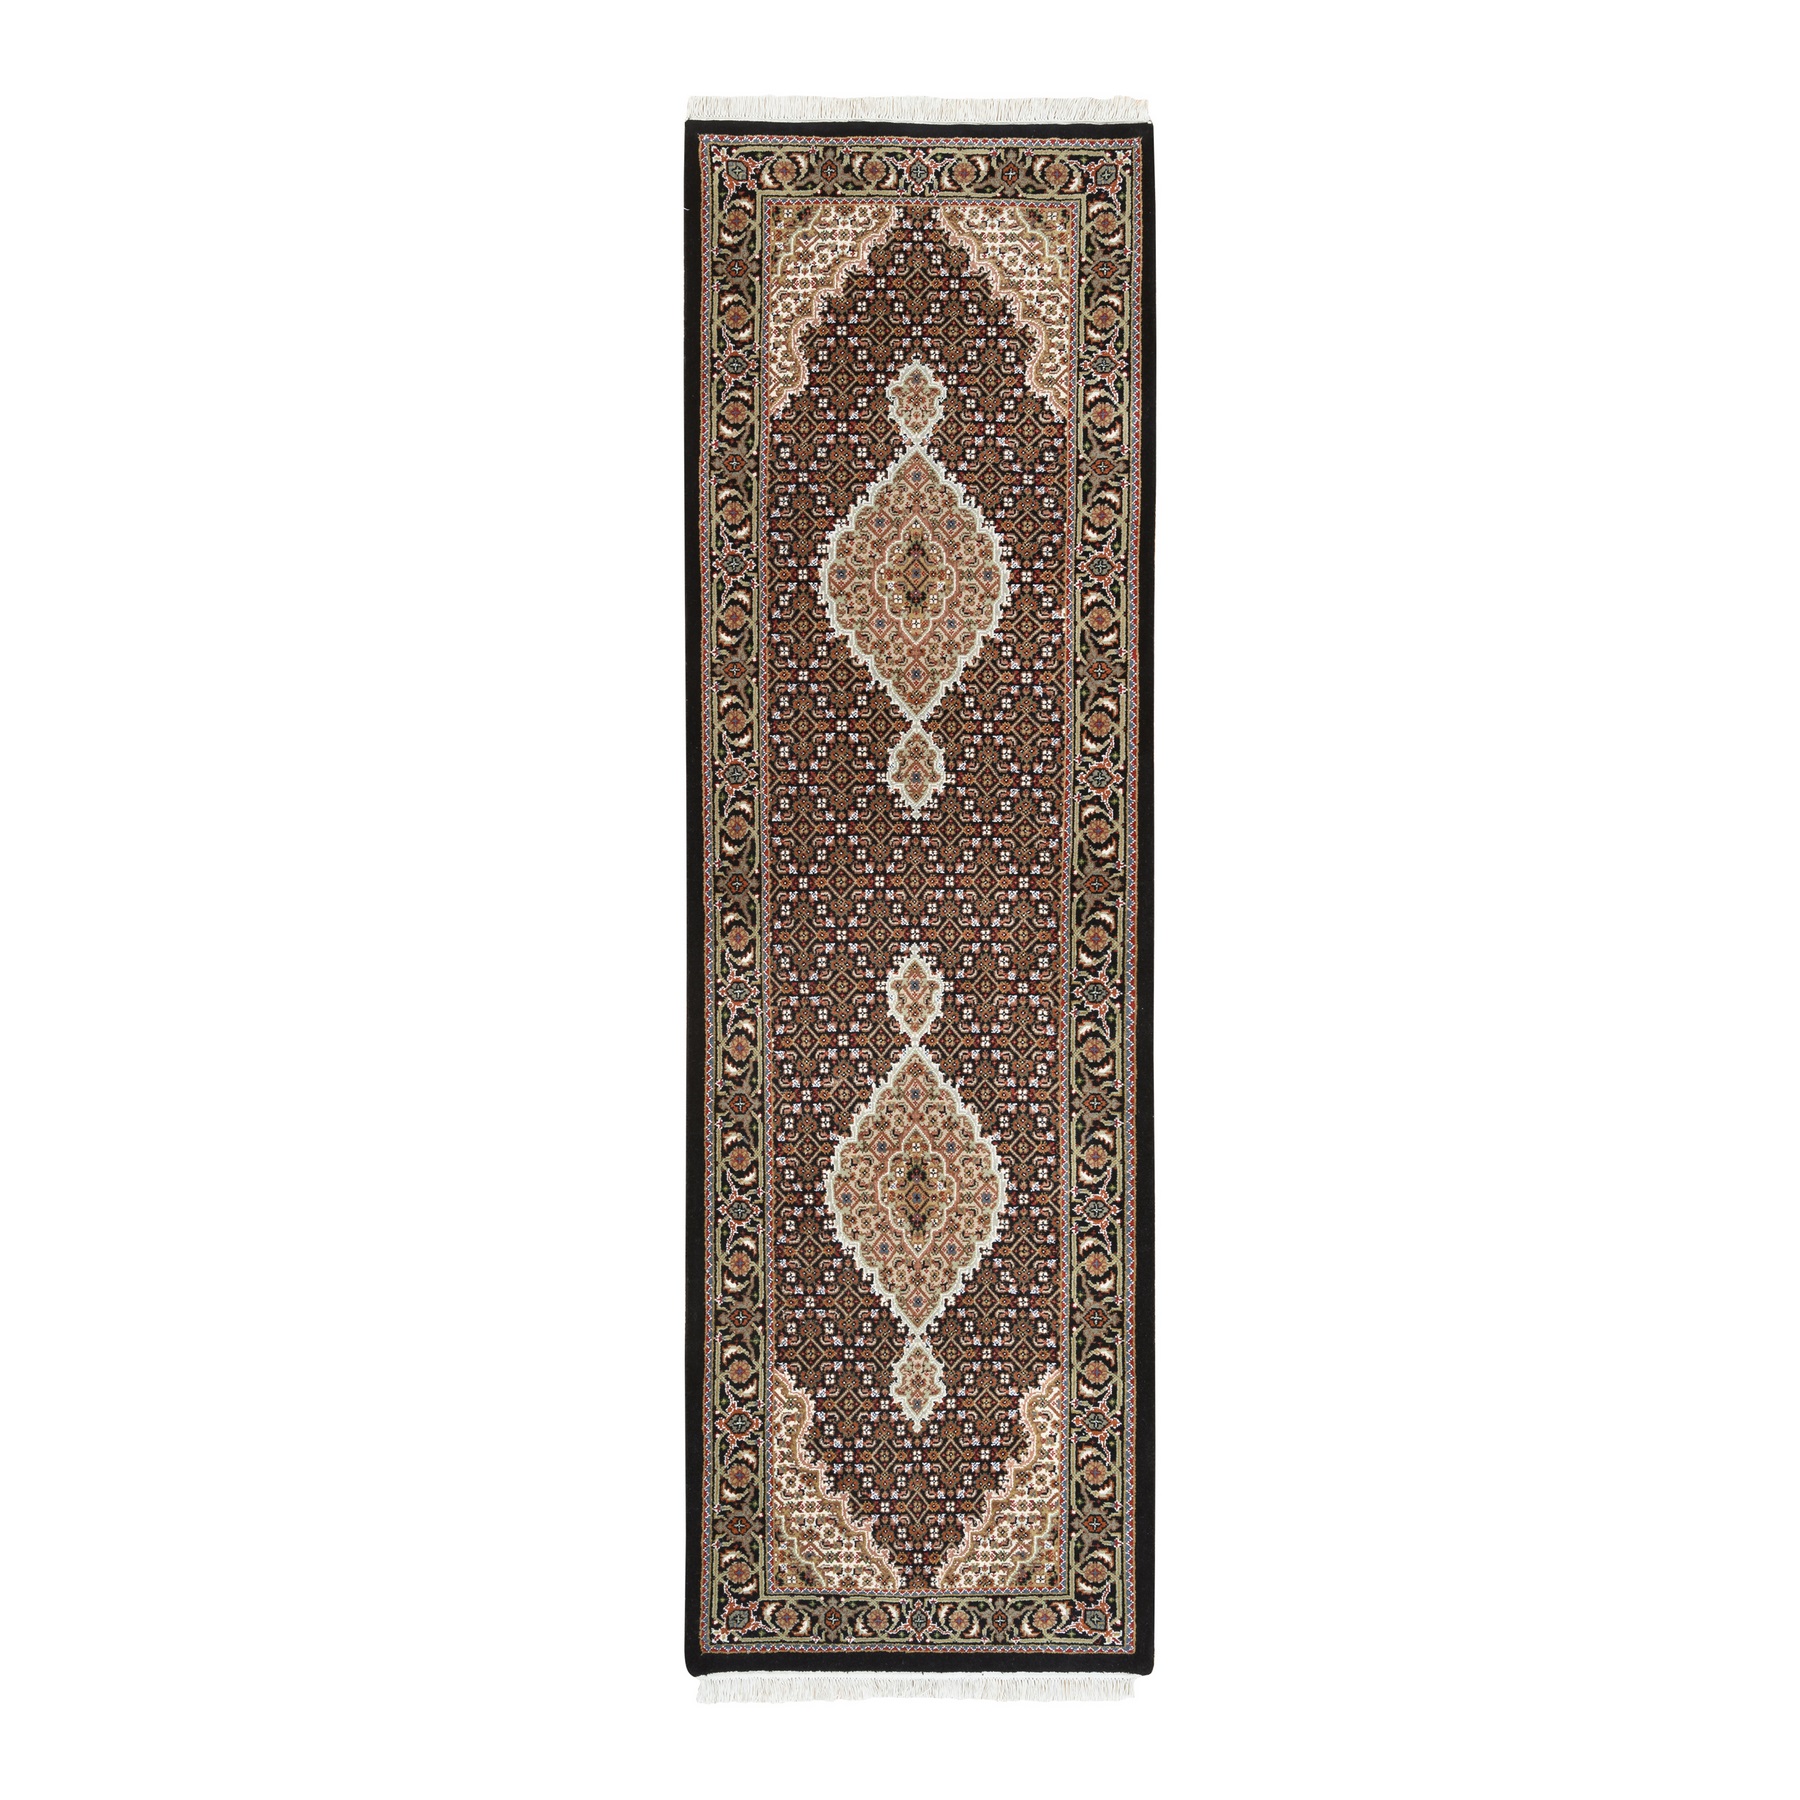 Pirniakan Collection Hand Knotted Black Rug No: 1125240